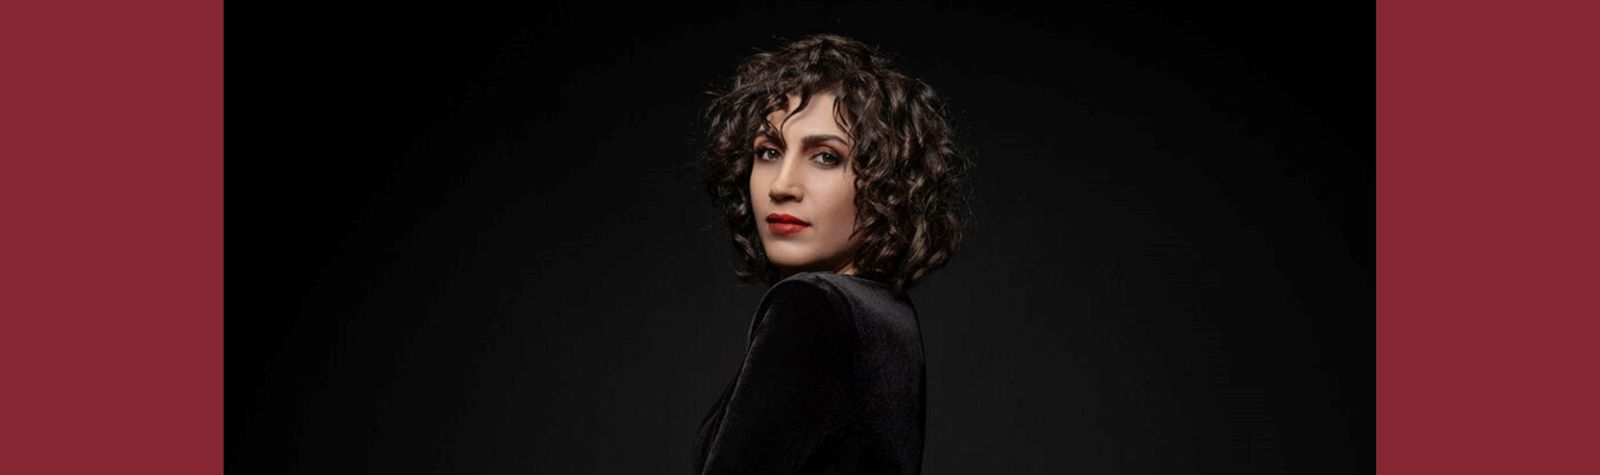 INTERVIEW: Grand Junction talks to Olcay Bayir ahead of her Elixir Festival concert